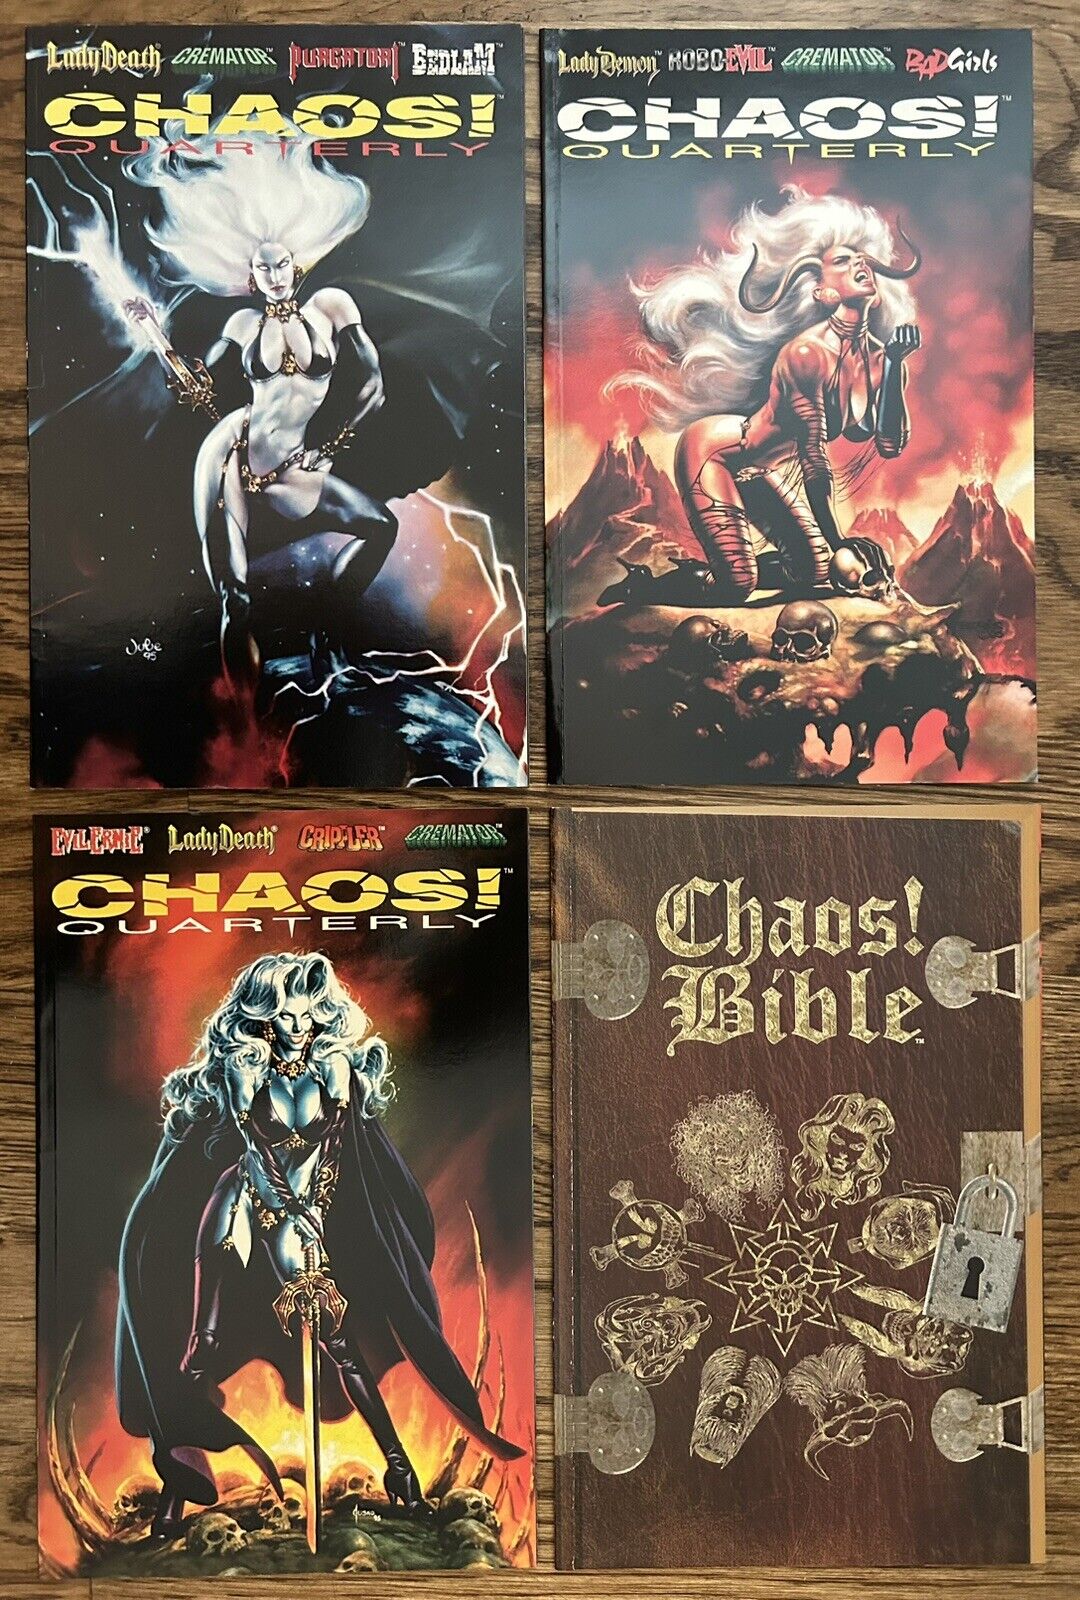 CHAOS QUARTERLY #1-3 BIBLE COMPLETE SET FULL RUN LADY DEATH 1st Apps 1995 NM